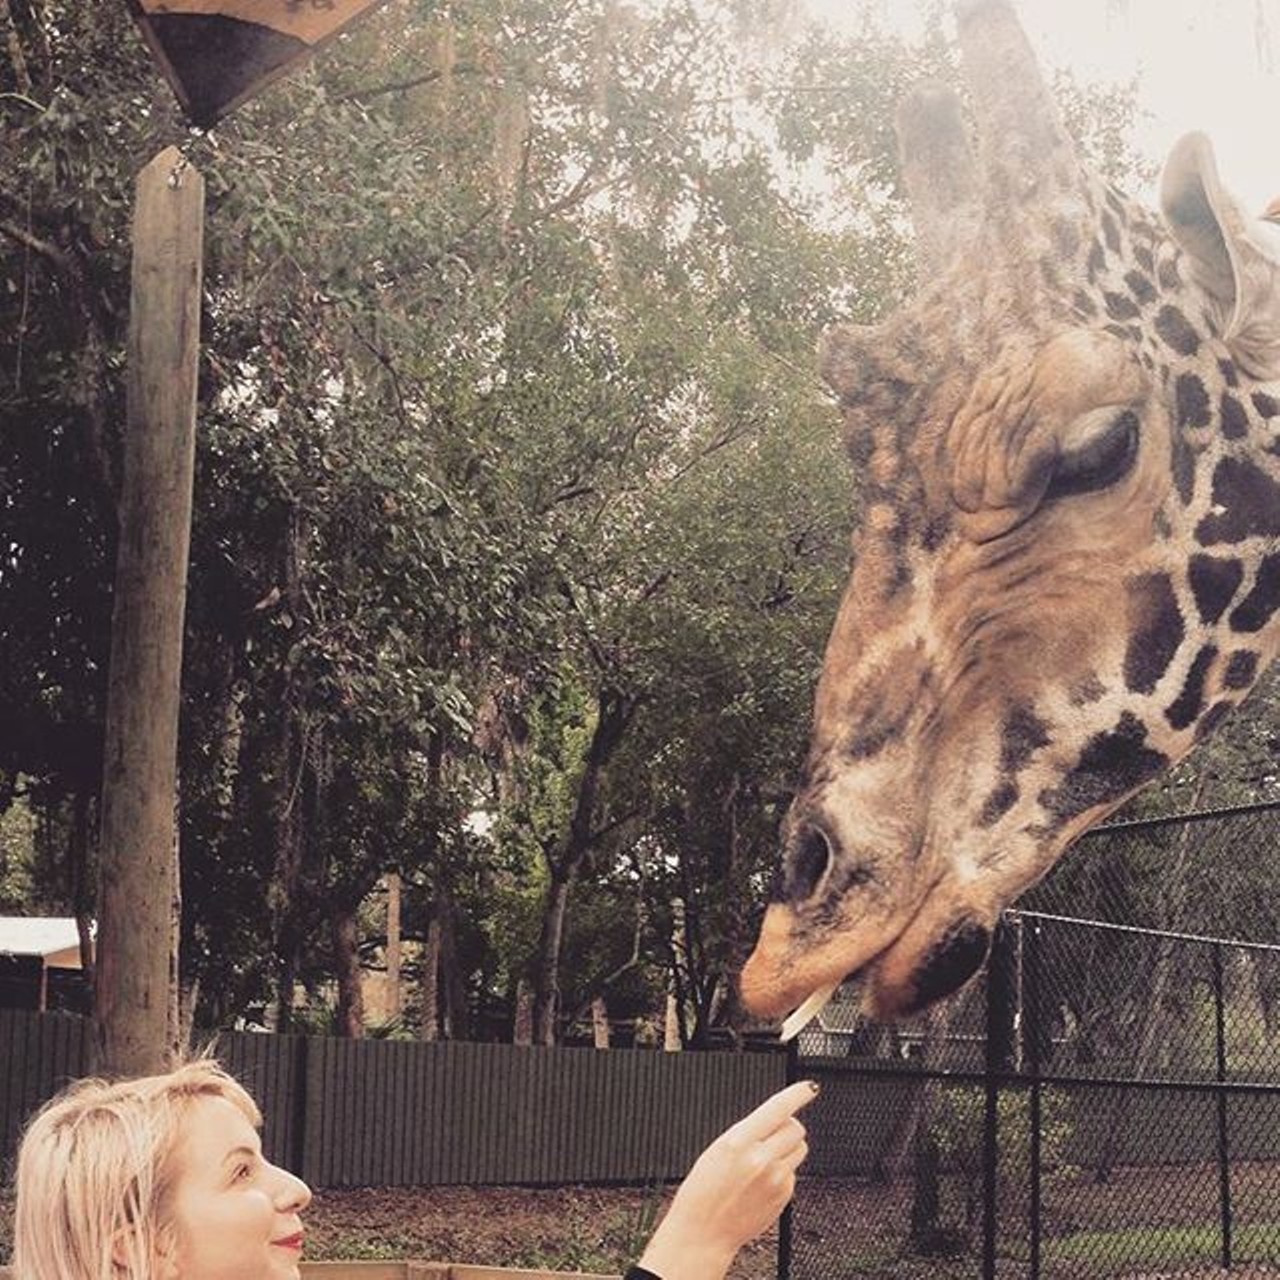 Instagram user iwontloveyou celebrated her birthday by feeding a giraffe at the Central Florida Zoo.